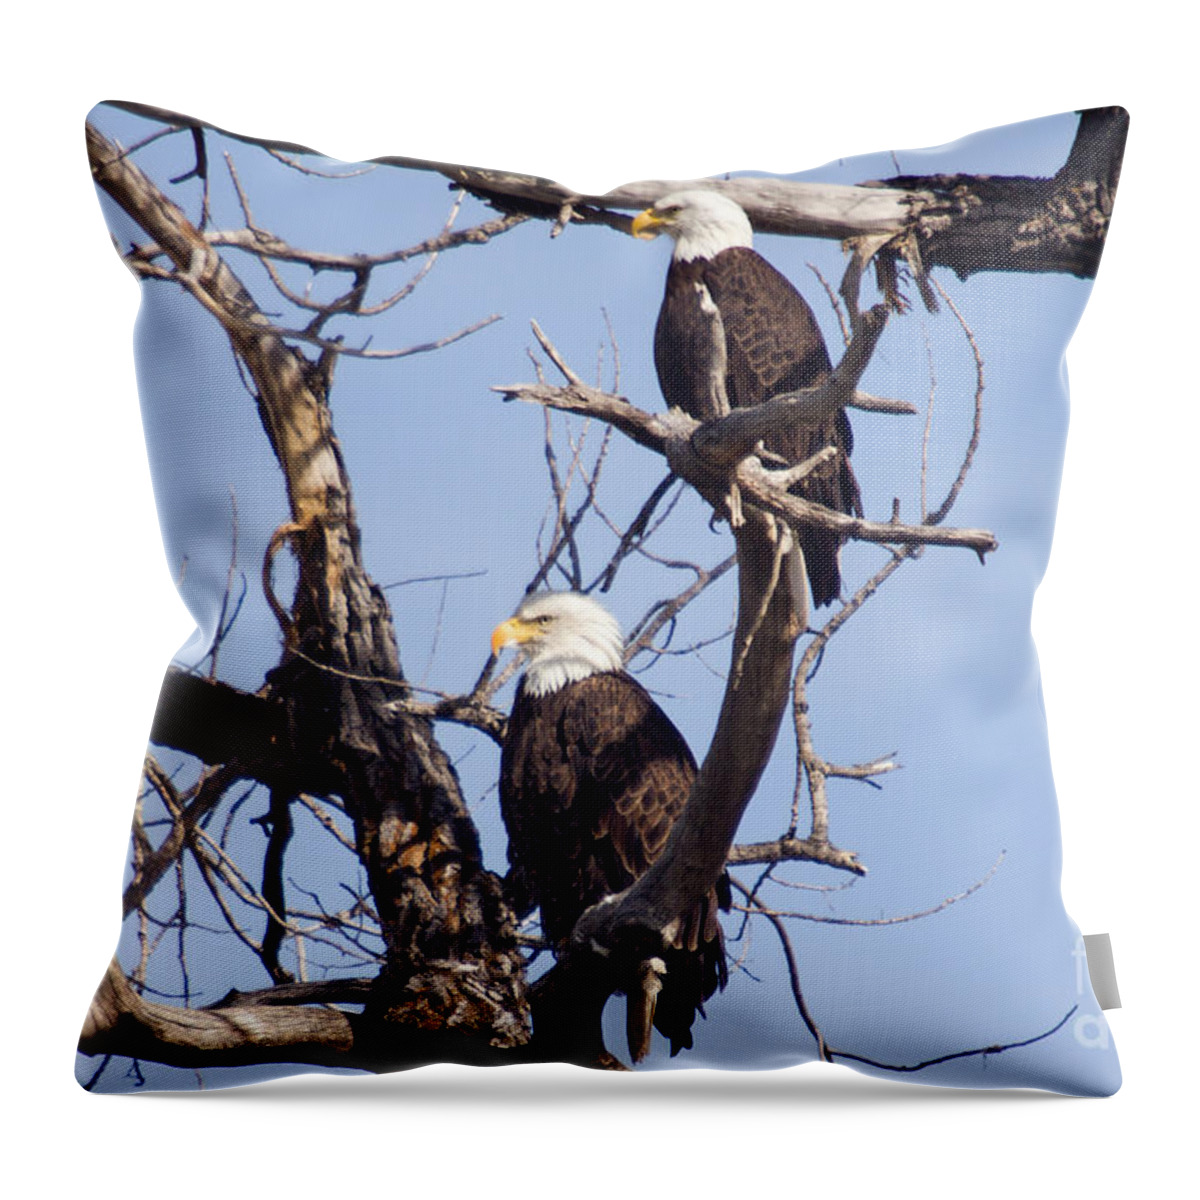 Colorado Throw Pillow featuring the photograph Proud Pair by Bob Hislop